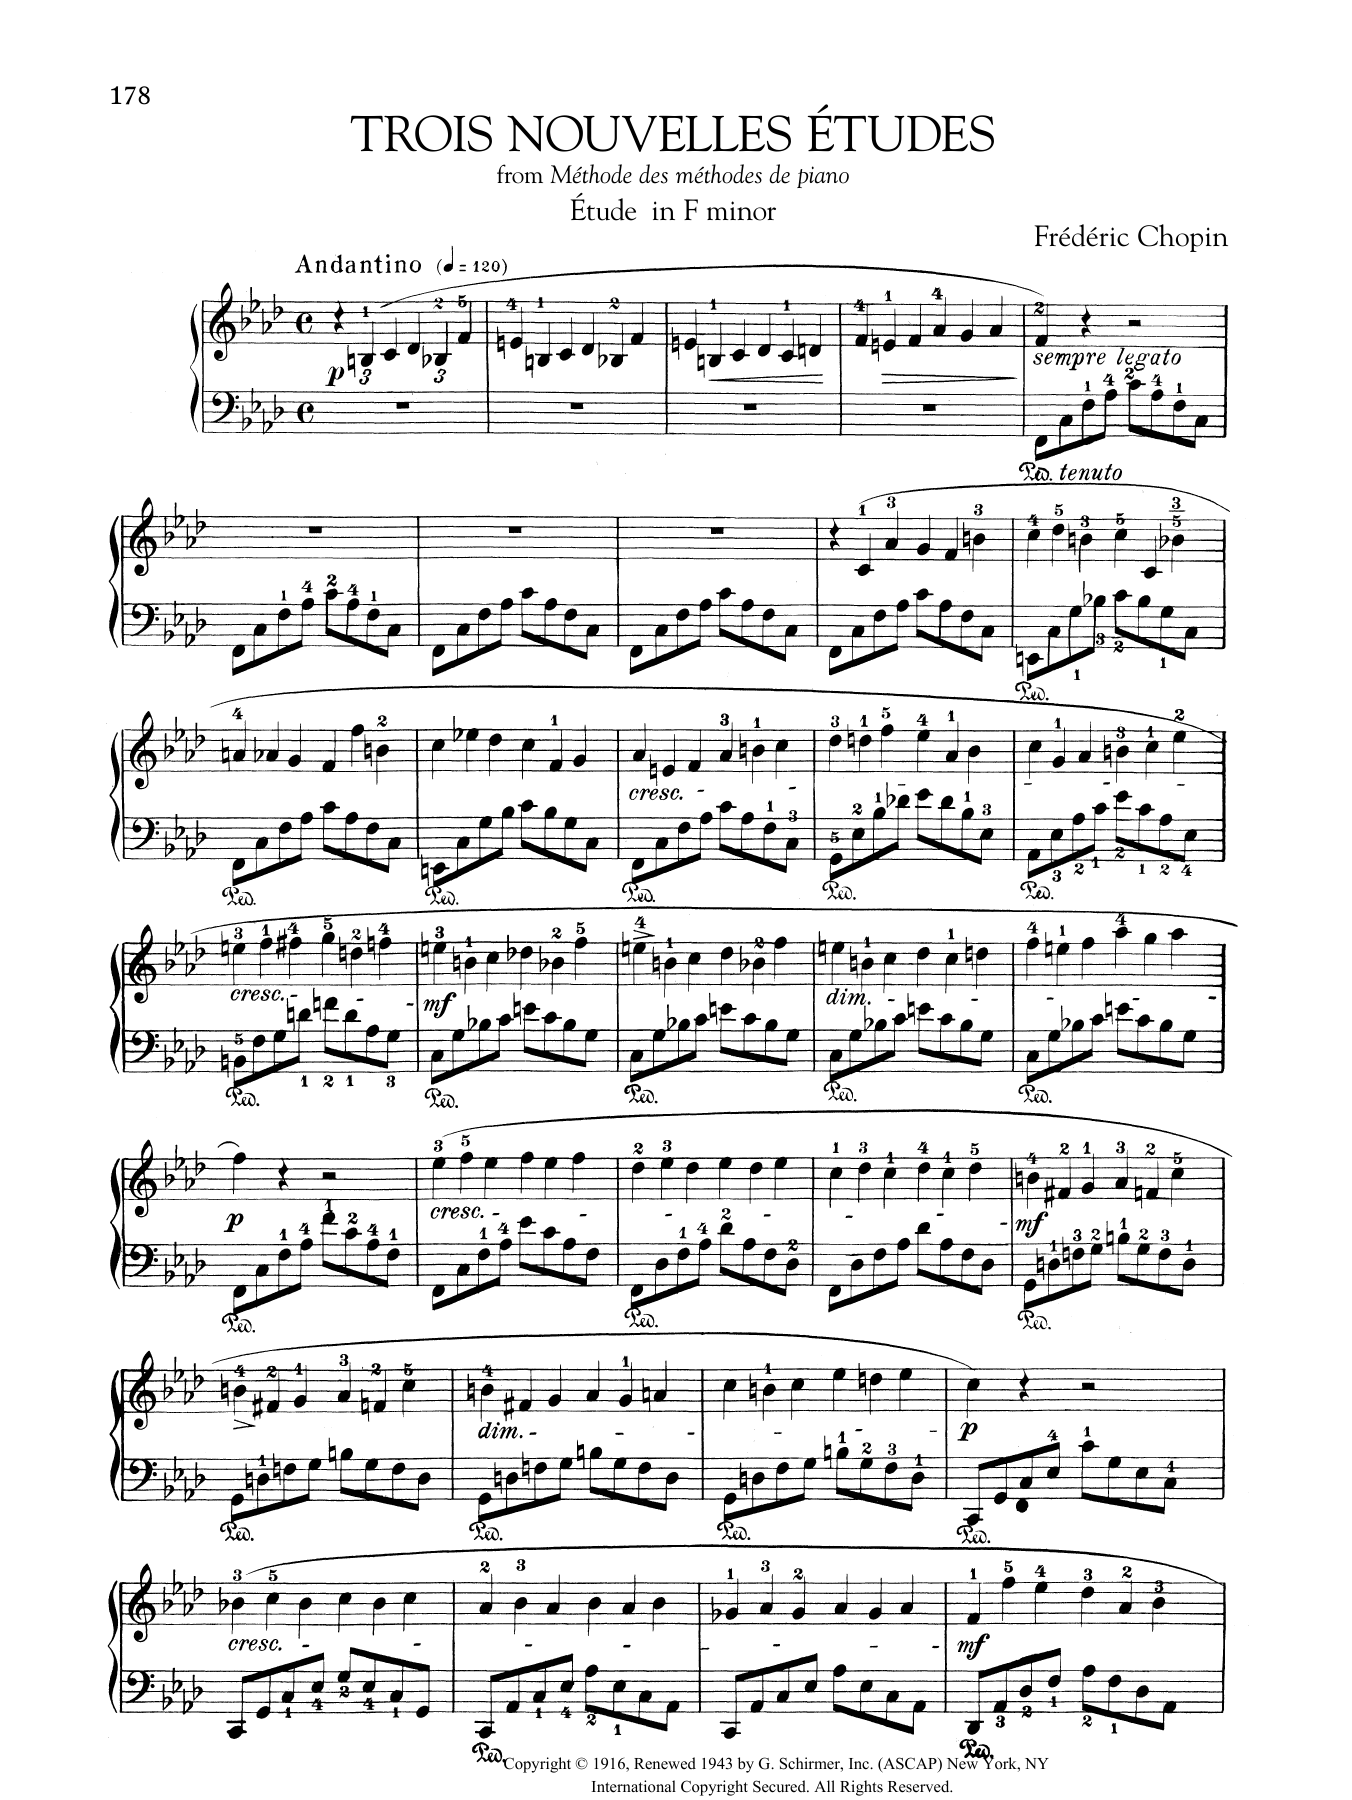 Download Frederic Chopin Etude in F minor, from Trois Nouvelles Sheet Music